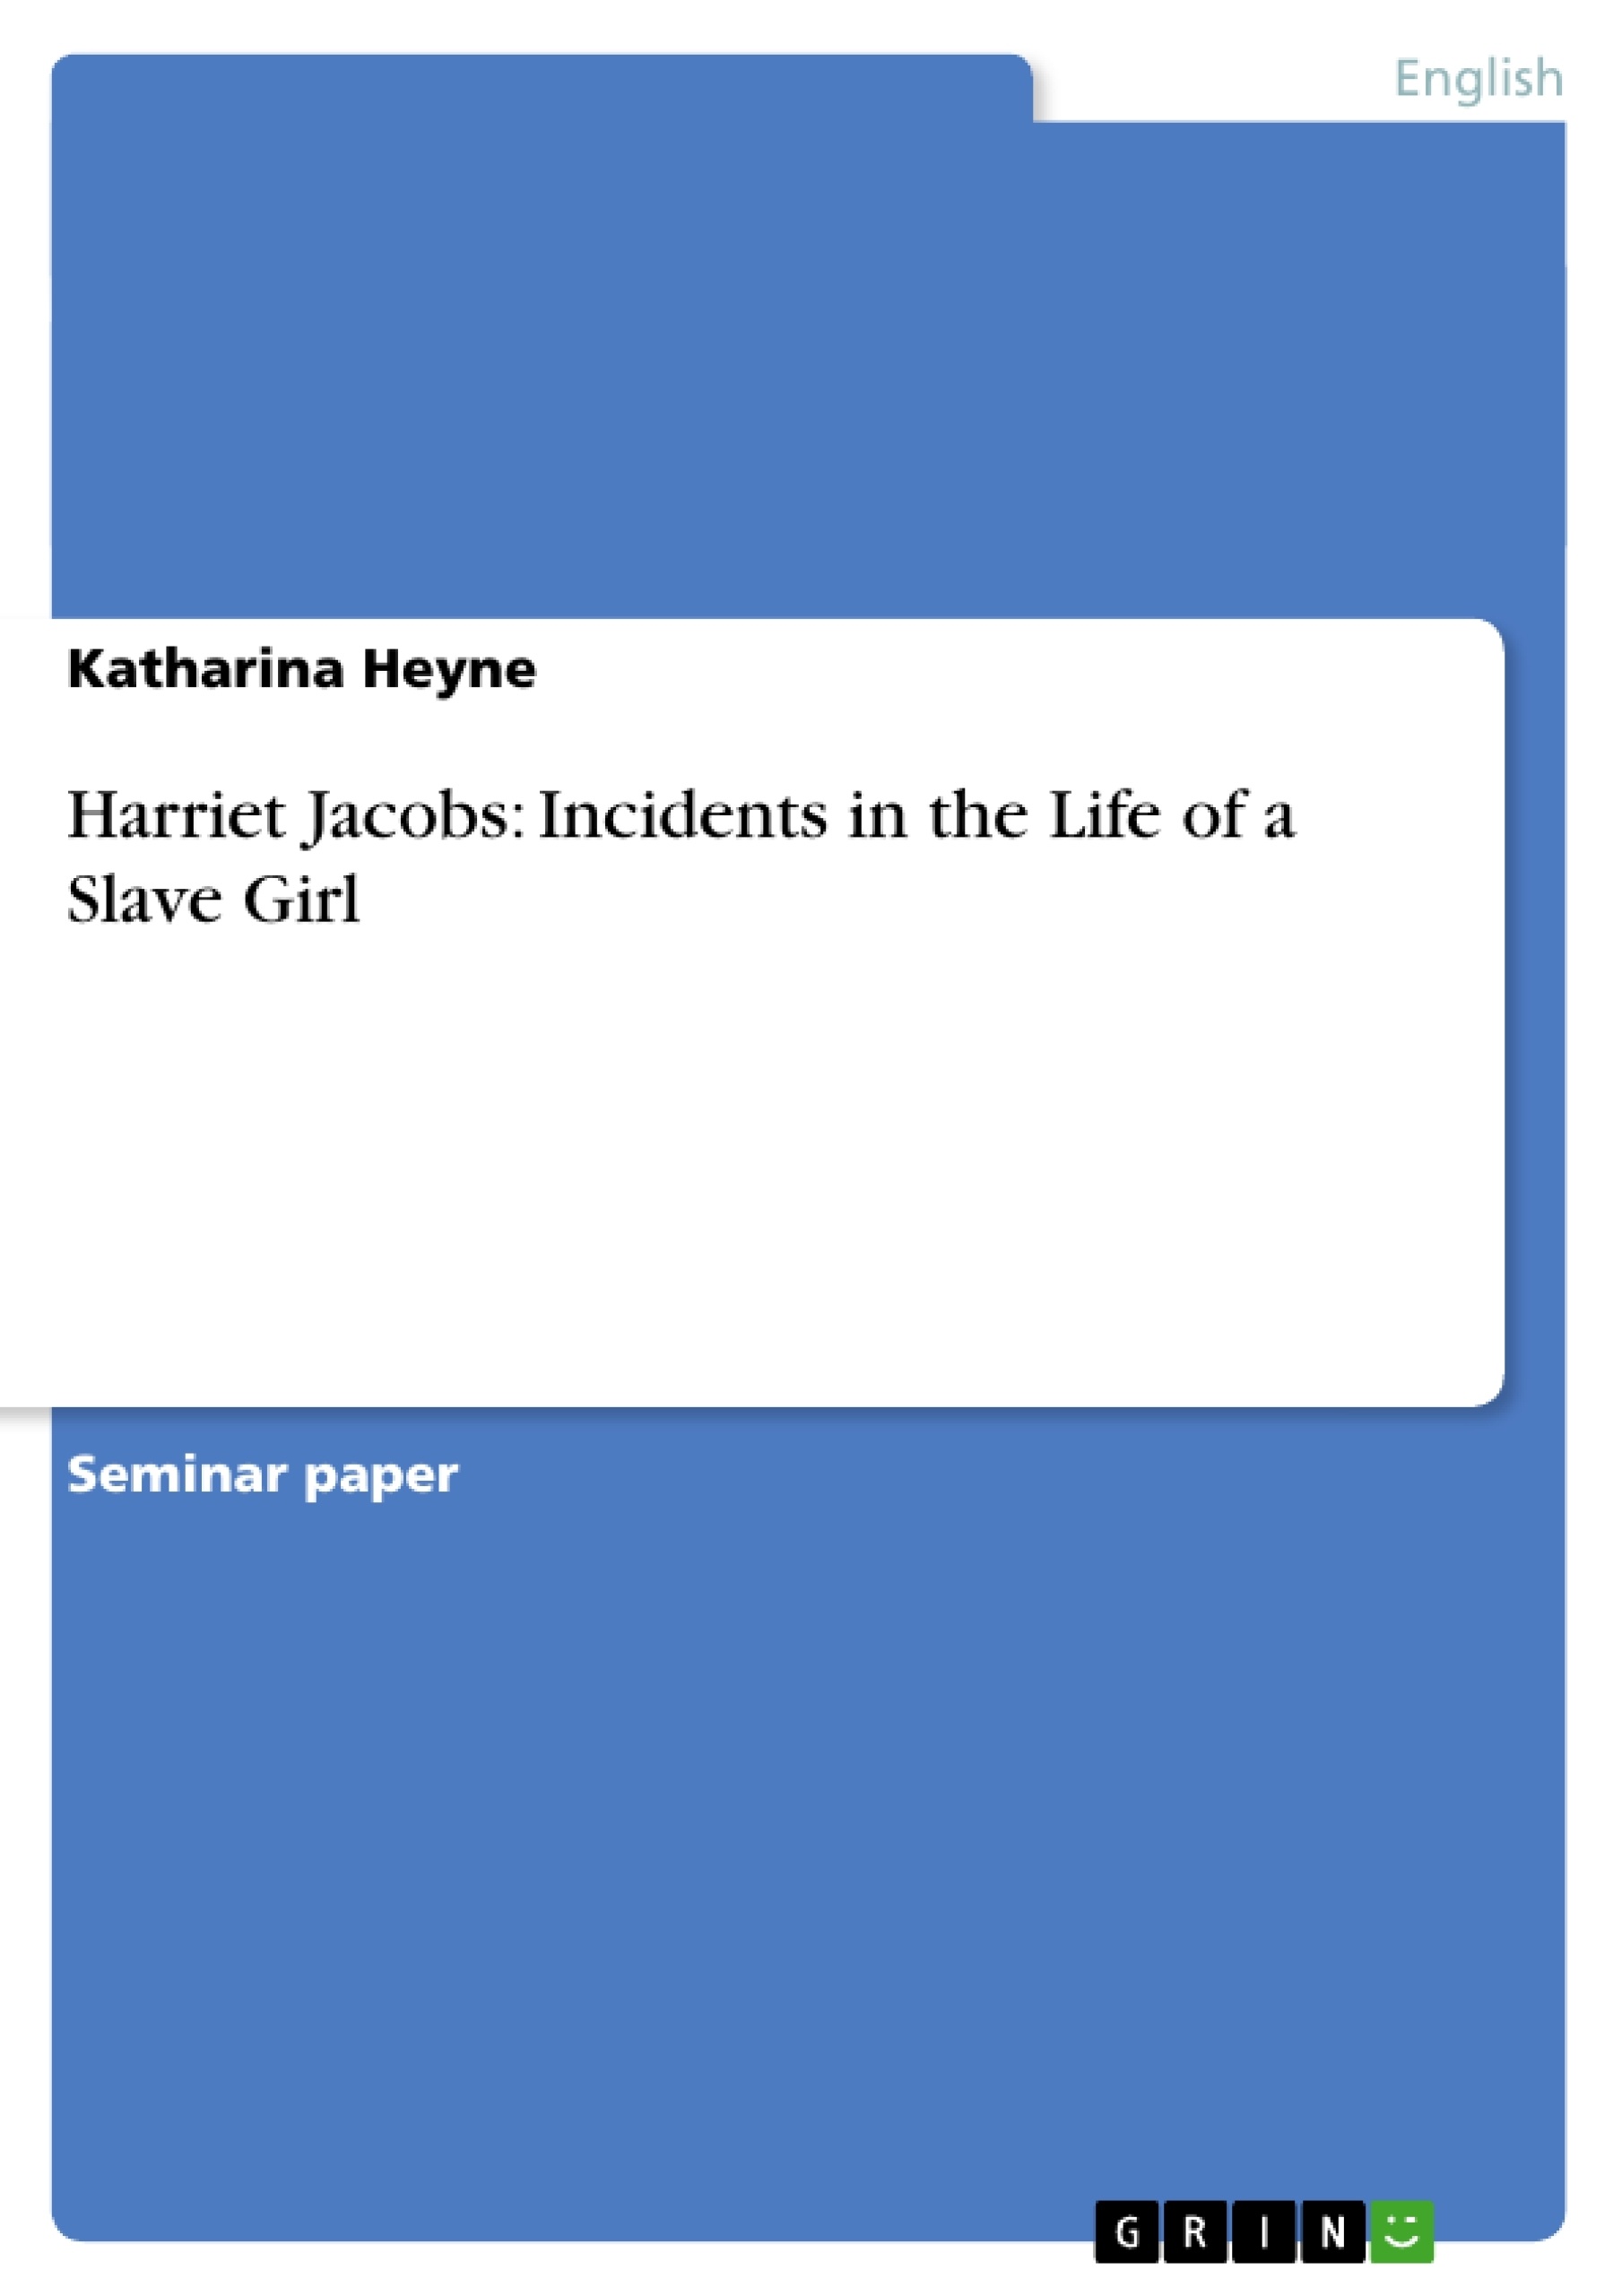 Título: Harriet Jacobs: Incidents in the Life of a Slave Girl